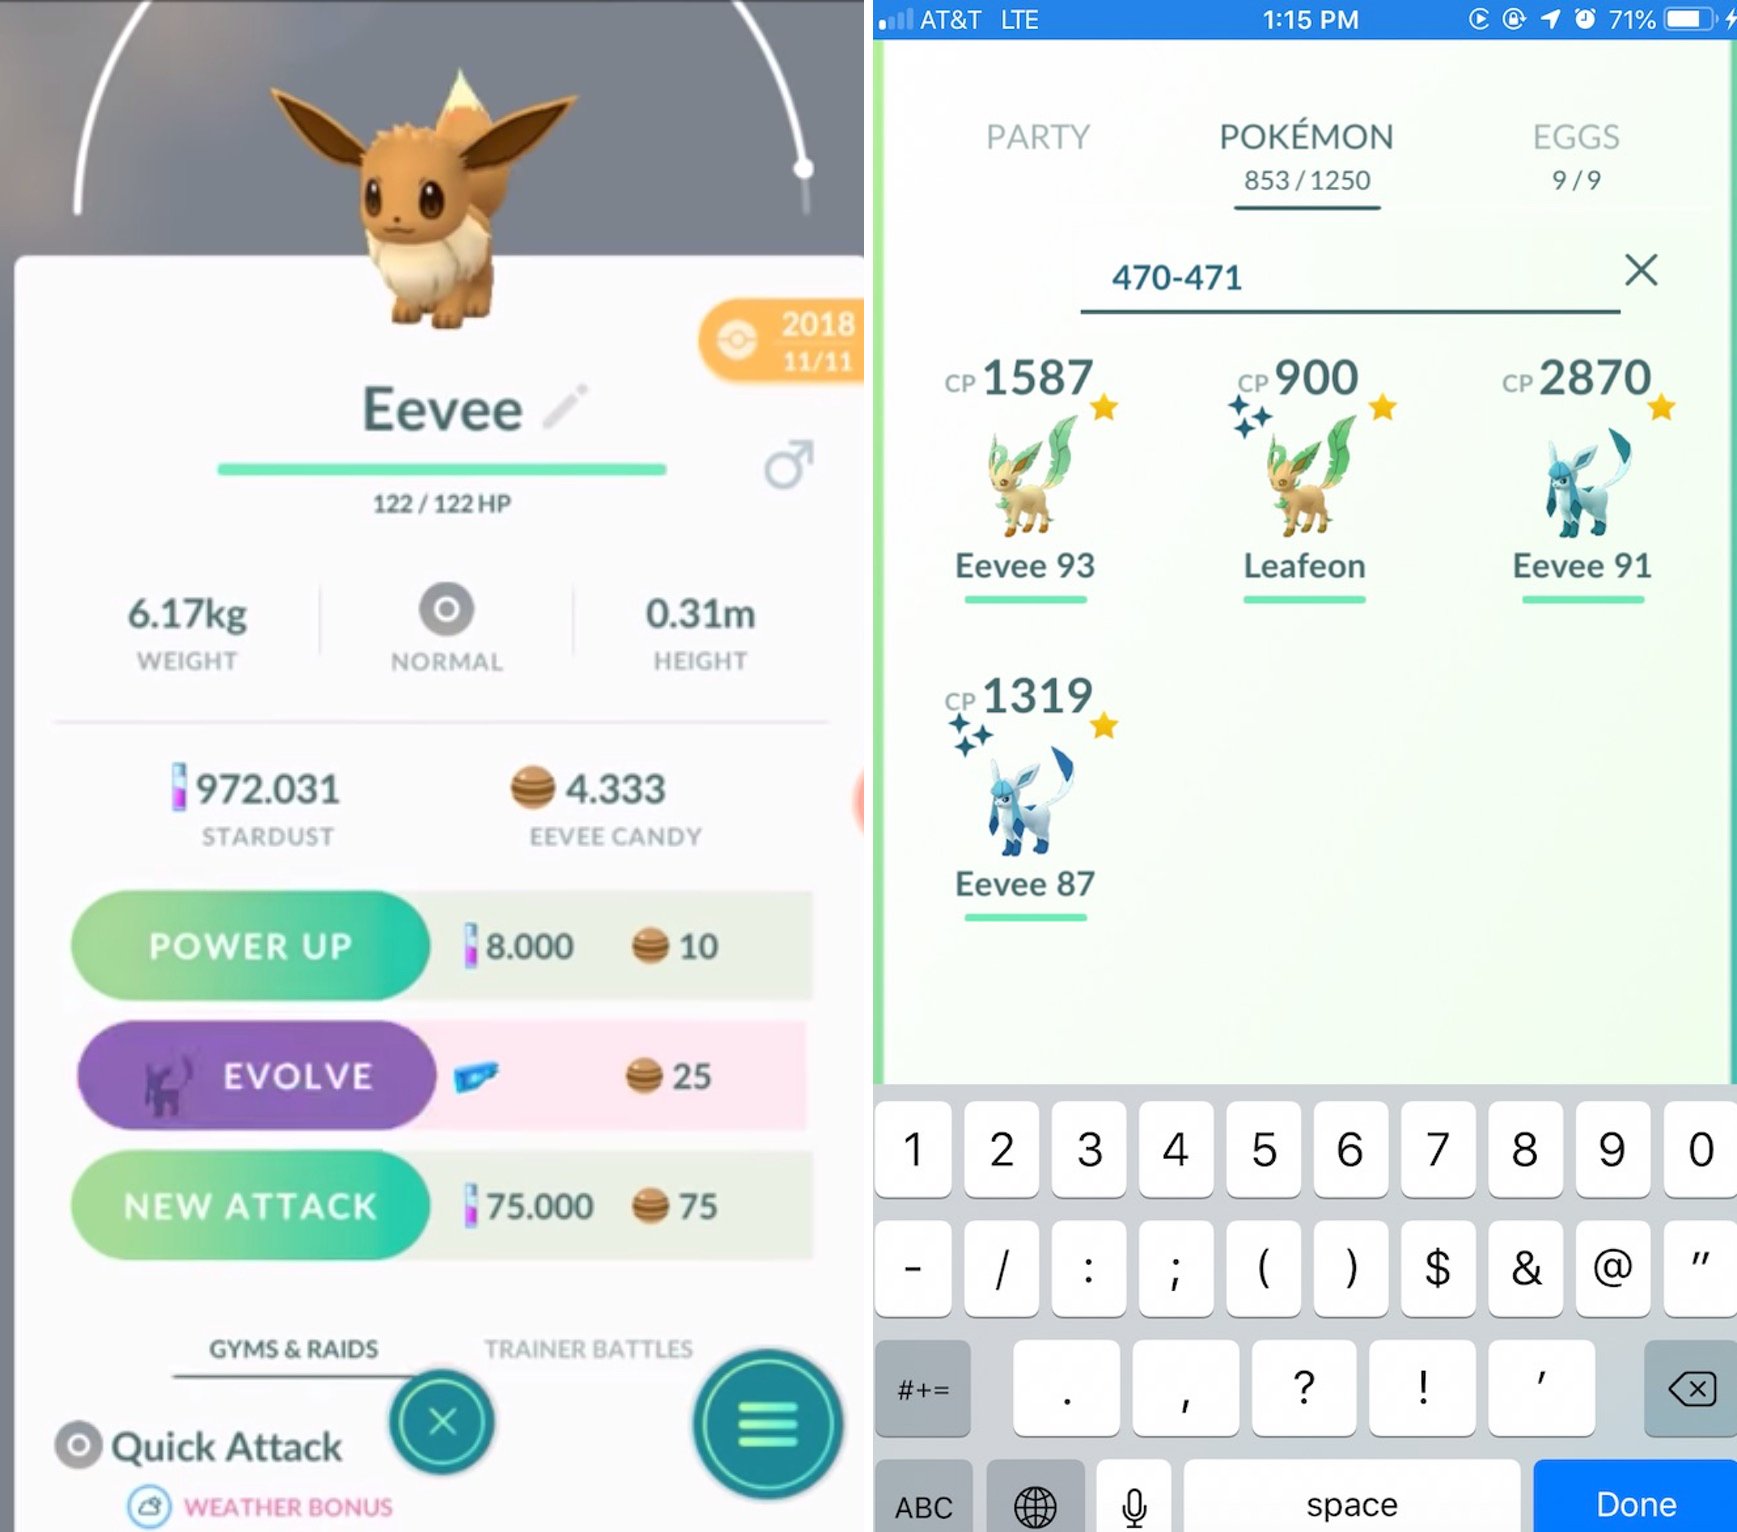 How To Evolve Eevee Into Glaceon Or Leafeon In Pokemon Go